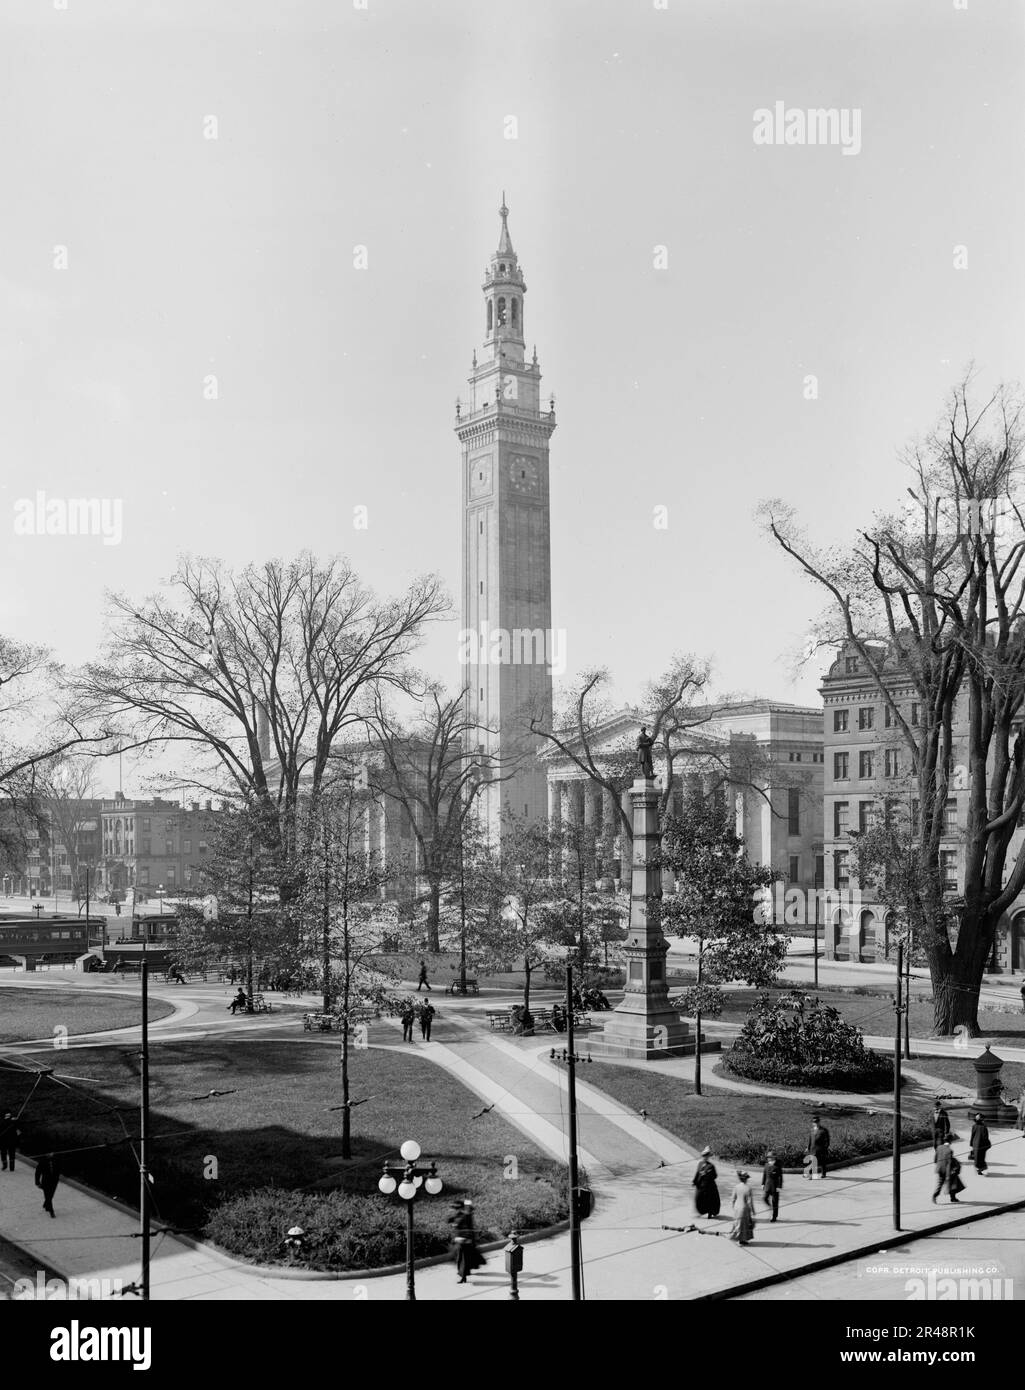 Court Square and Municipal Group, Springfield, Mass., c.between 1910 und 1920. Stockfoto